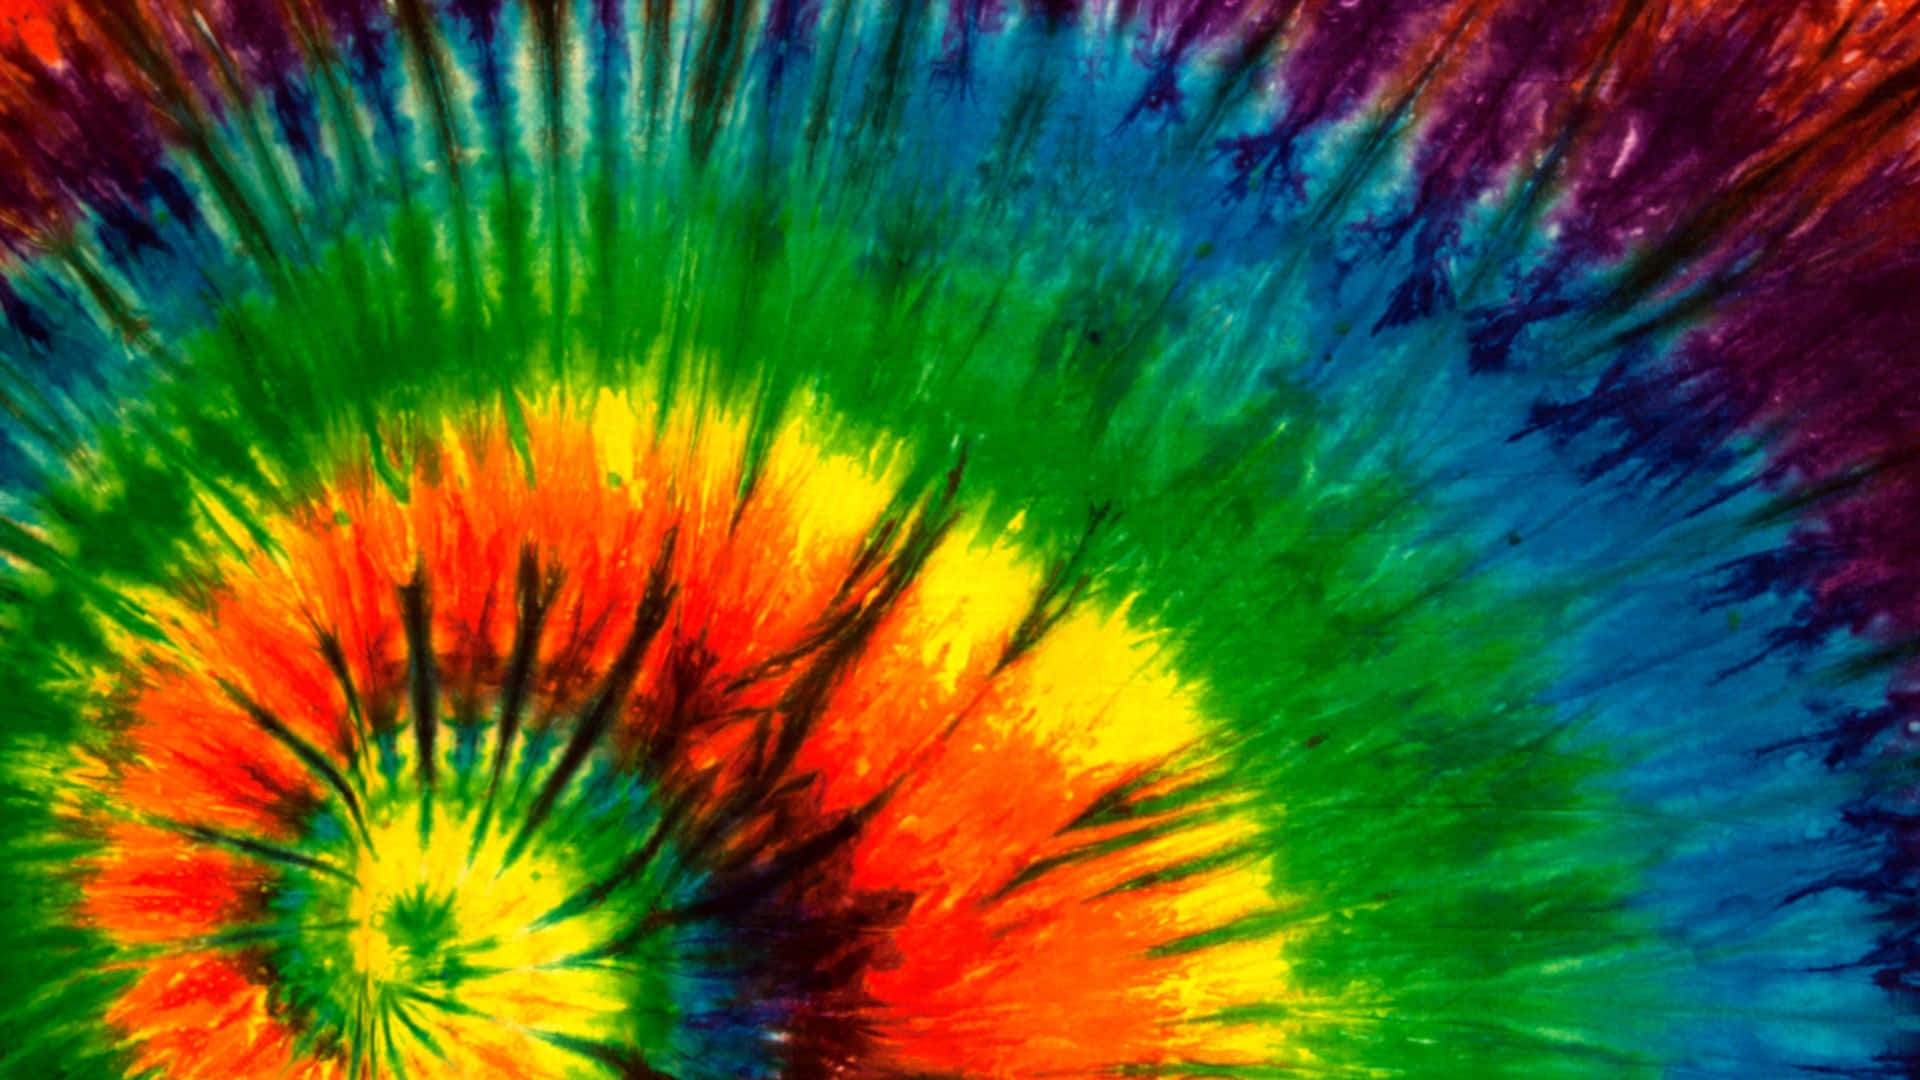 Download Enjoy the vibrant colors of tie dye | Wallpapers.com